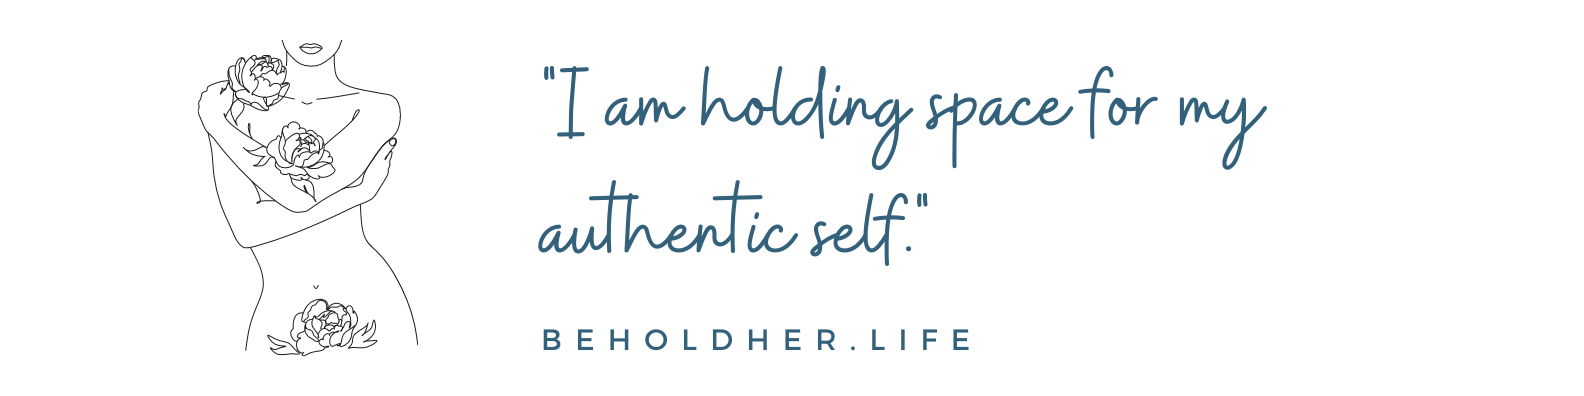 I am holding space for my authentic self | The Daily Affirmation Deck | beholdher.life